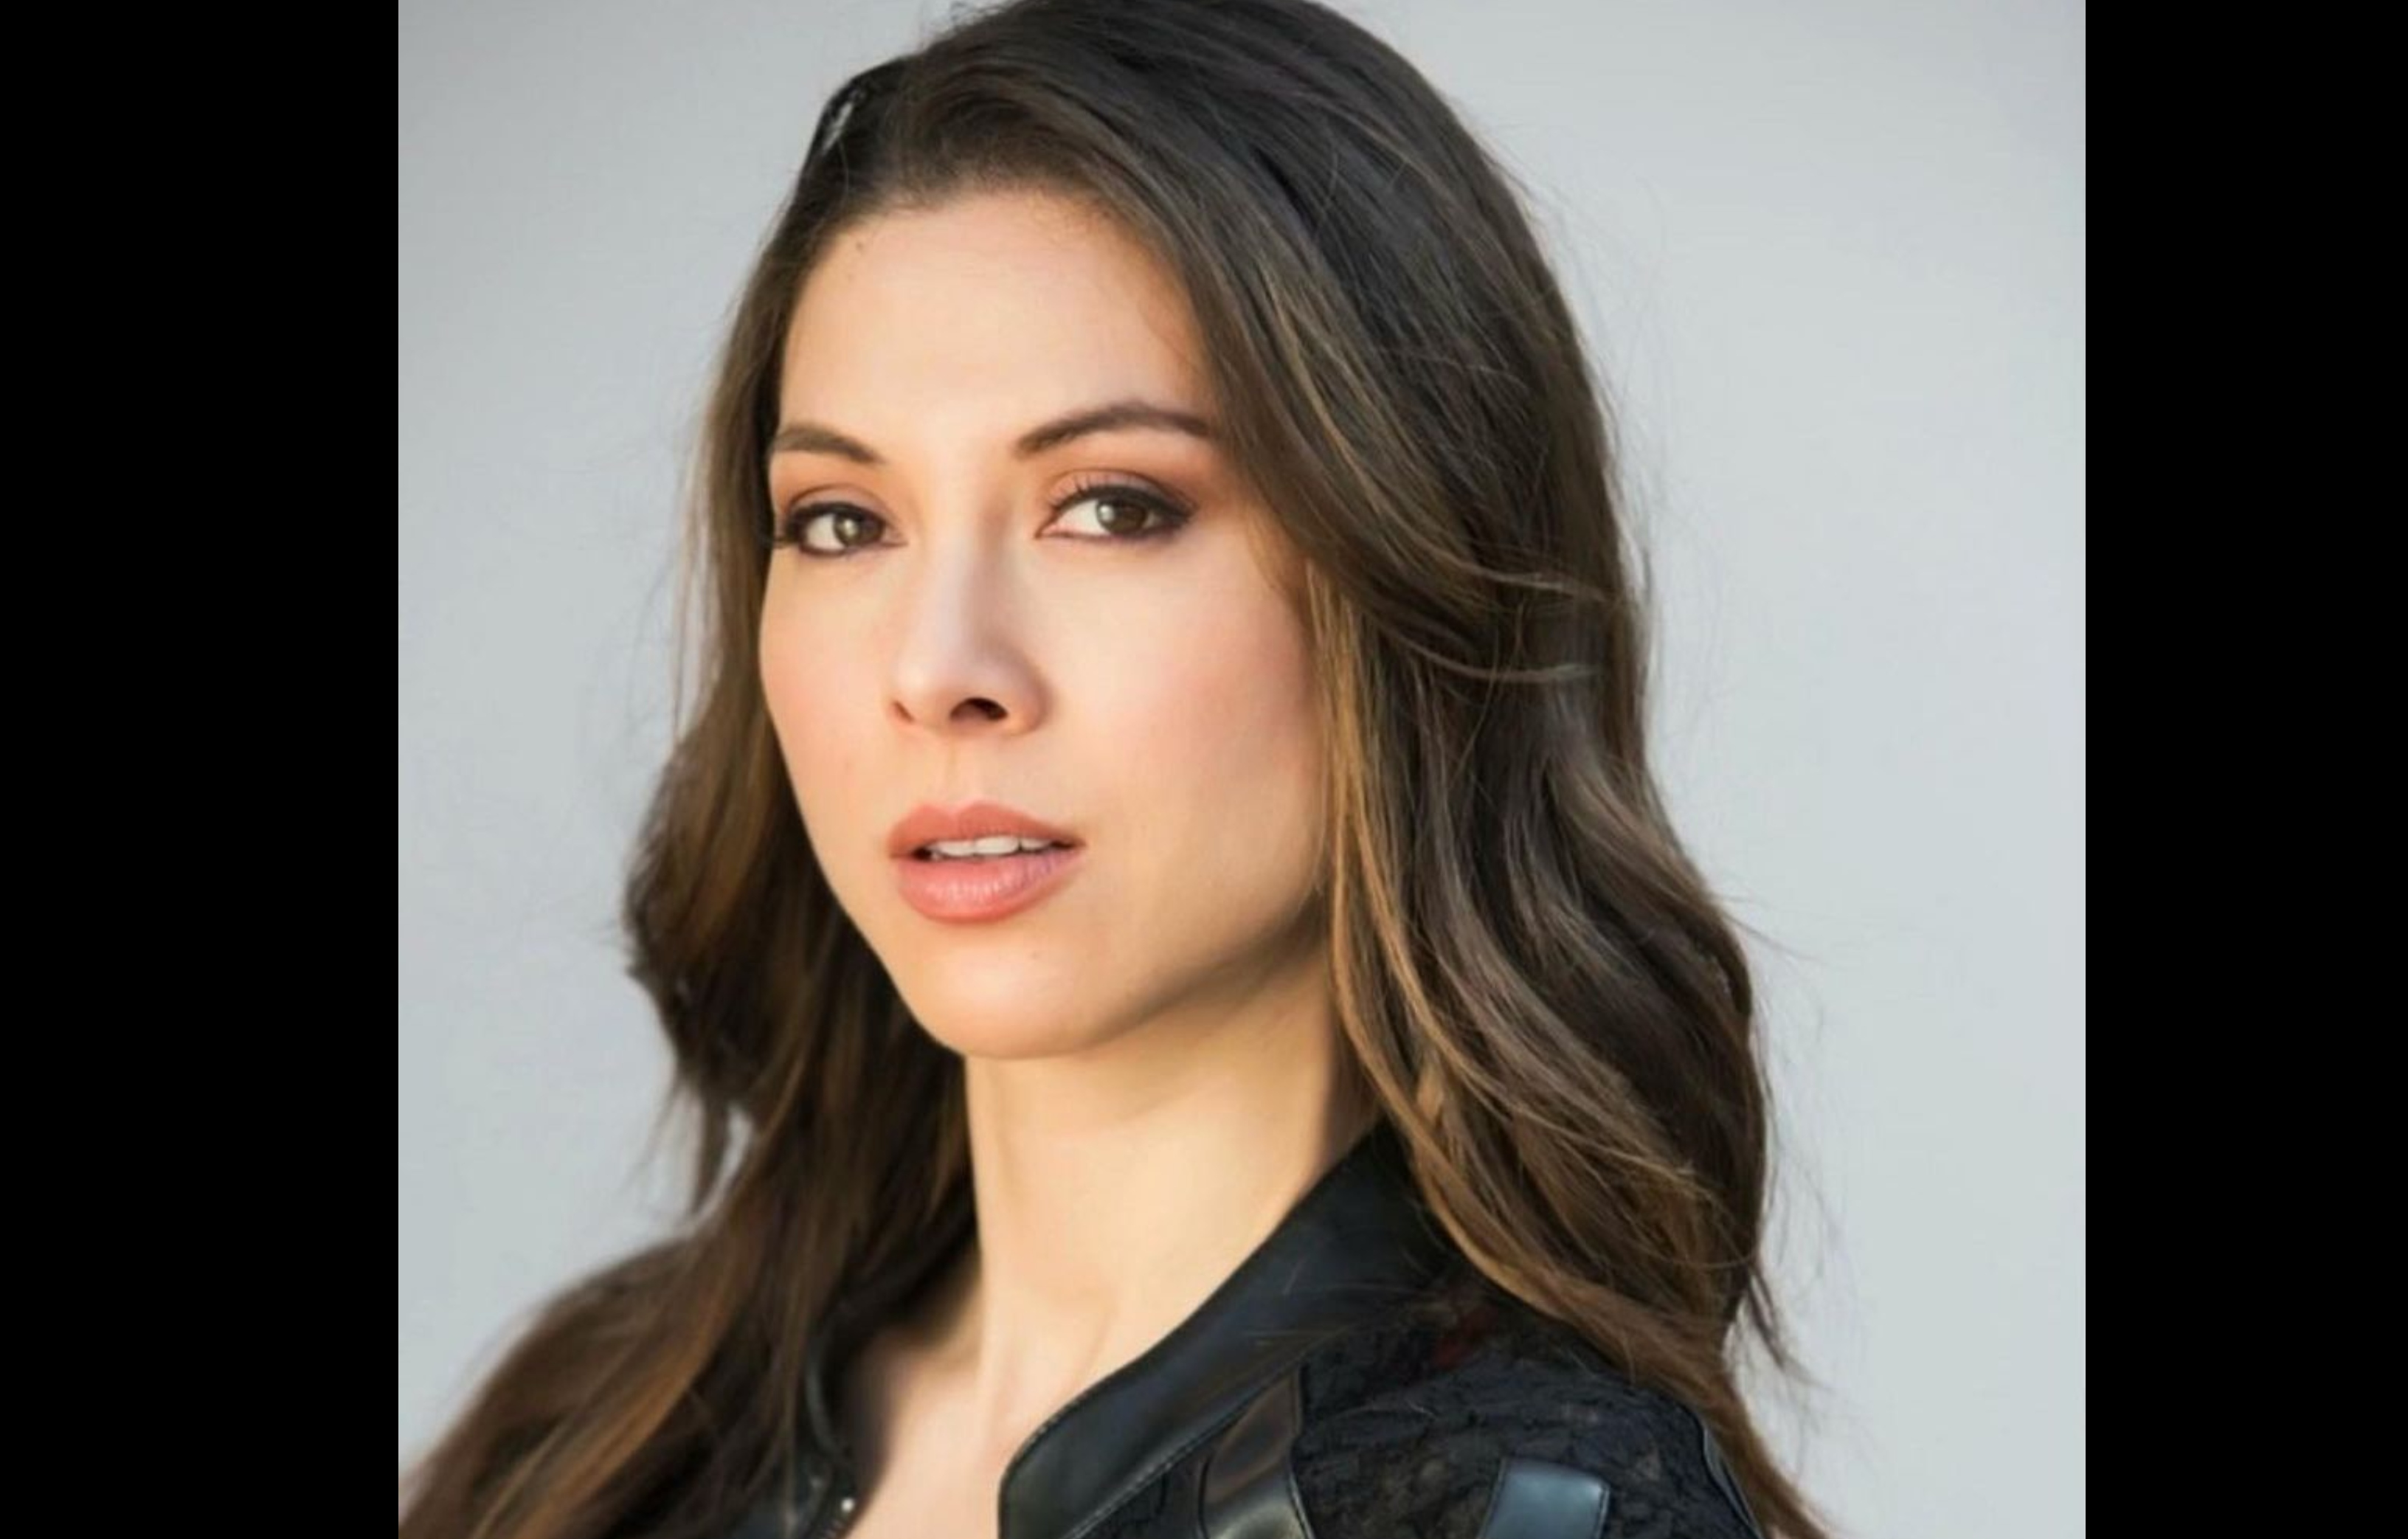 The Young and the Restless Alum Laur Allen Gets Exciting New Gig!